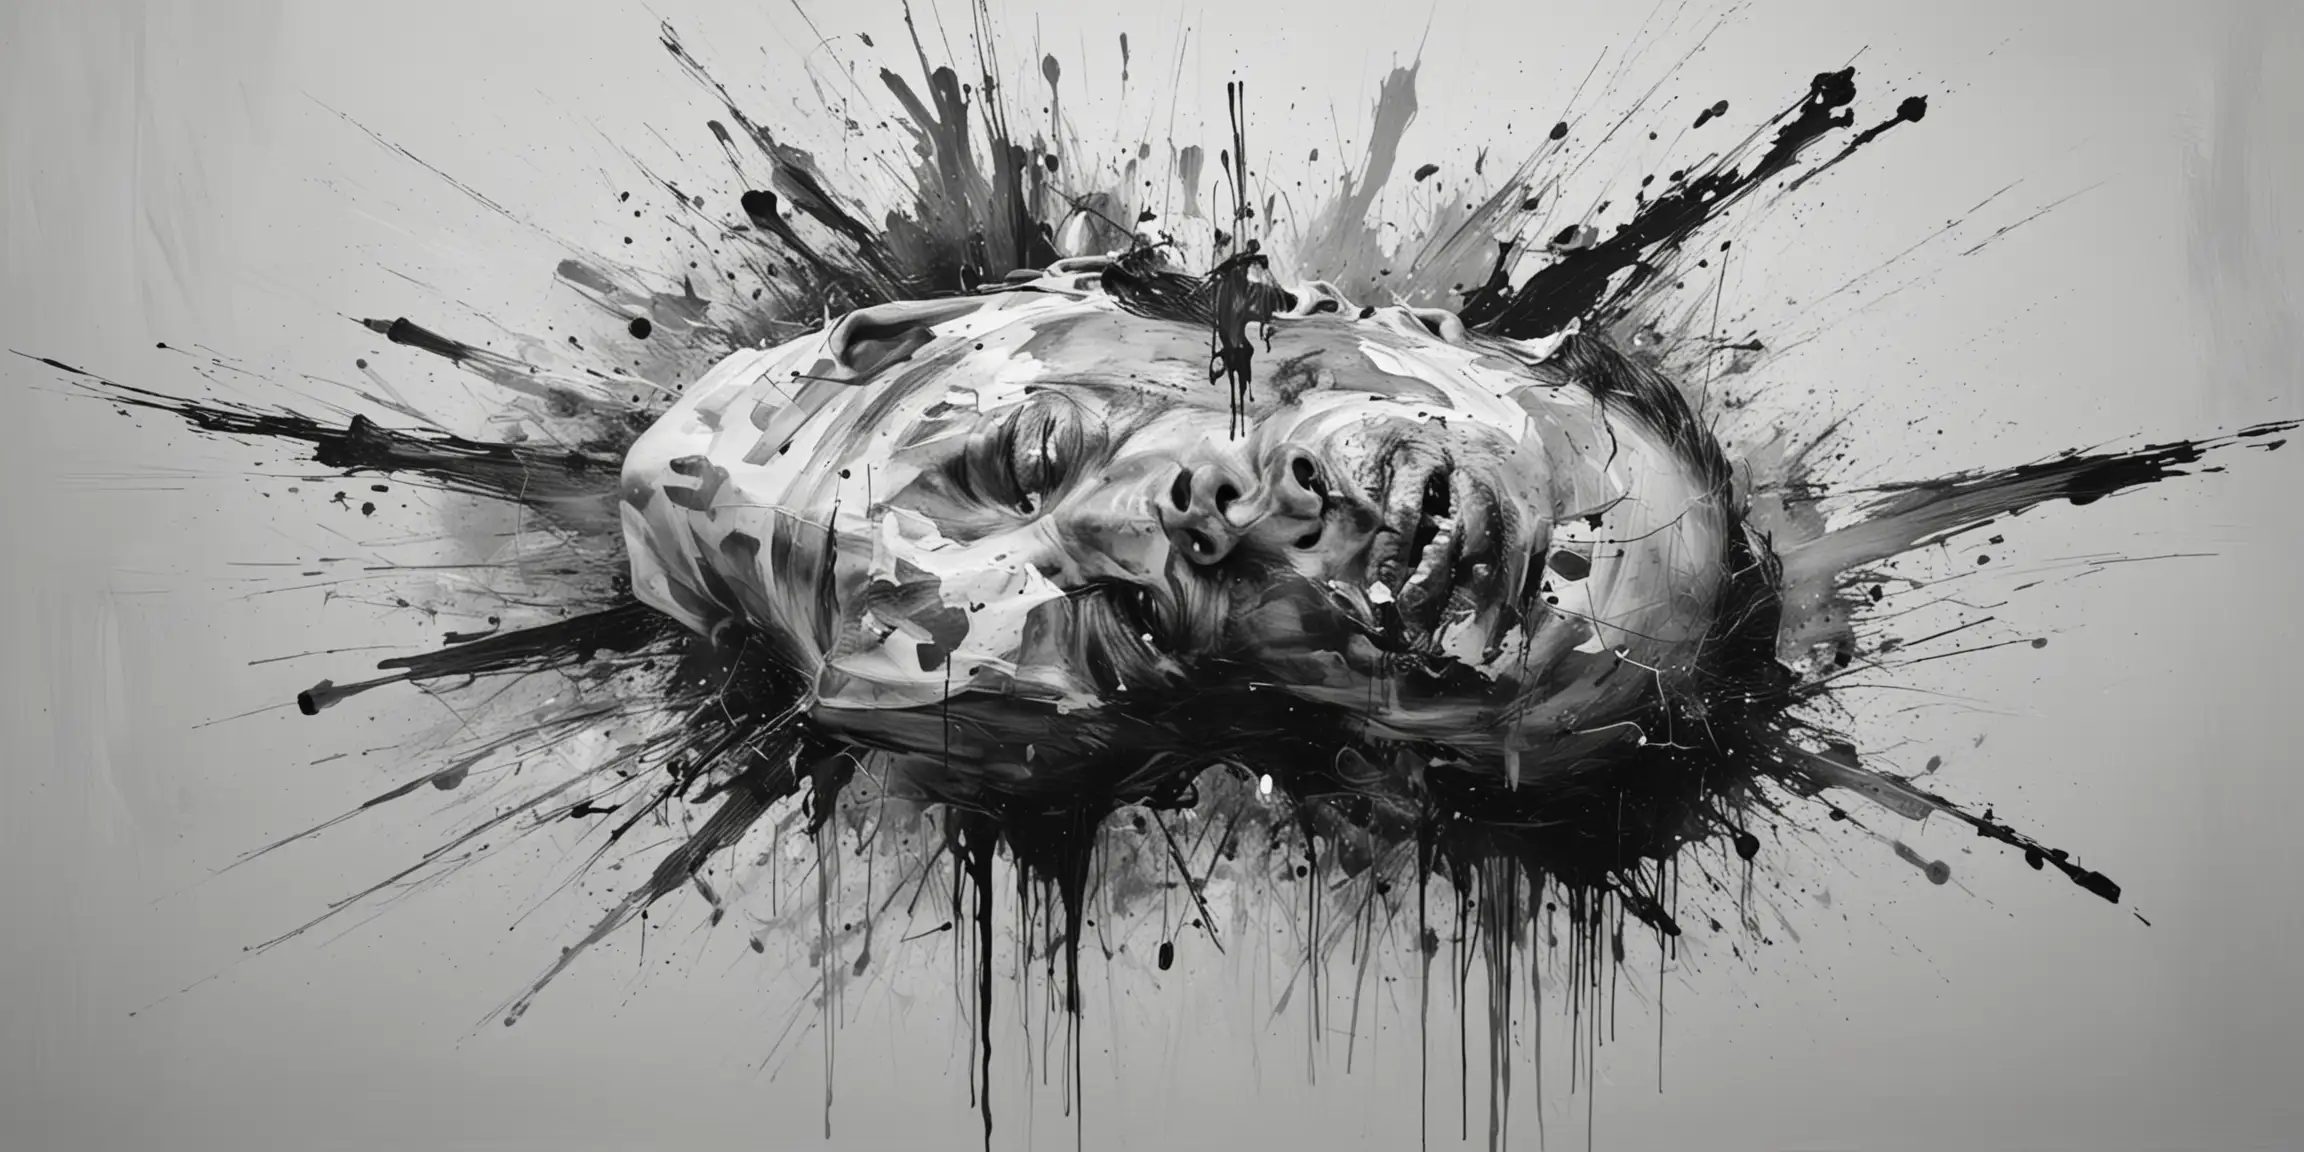 Abstract expressionism portrait photo of a man full of pain performing a lie, black and white, head turned slightly, symbolism in paint marks